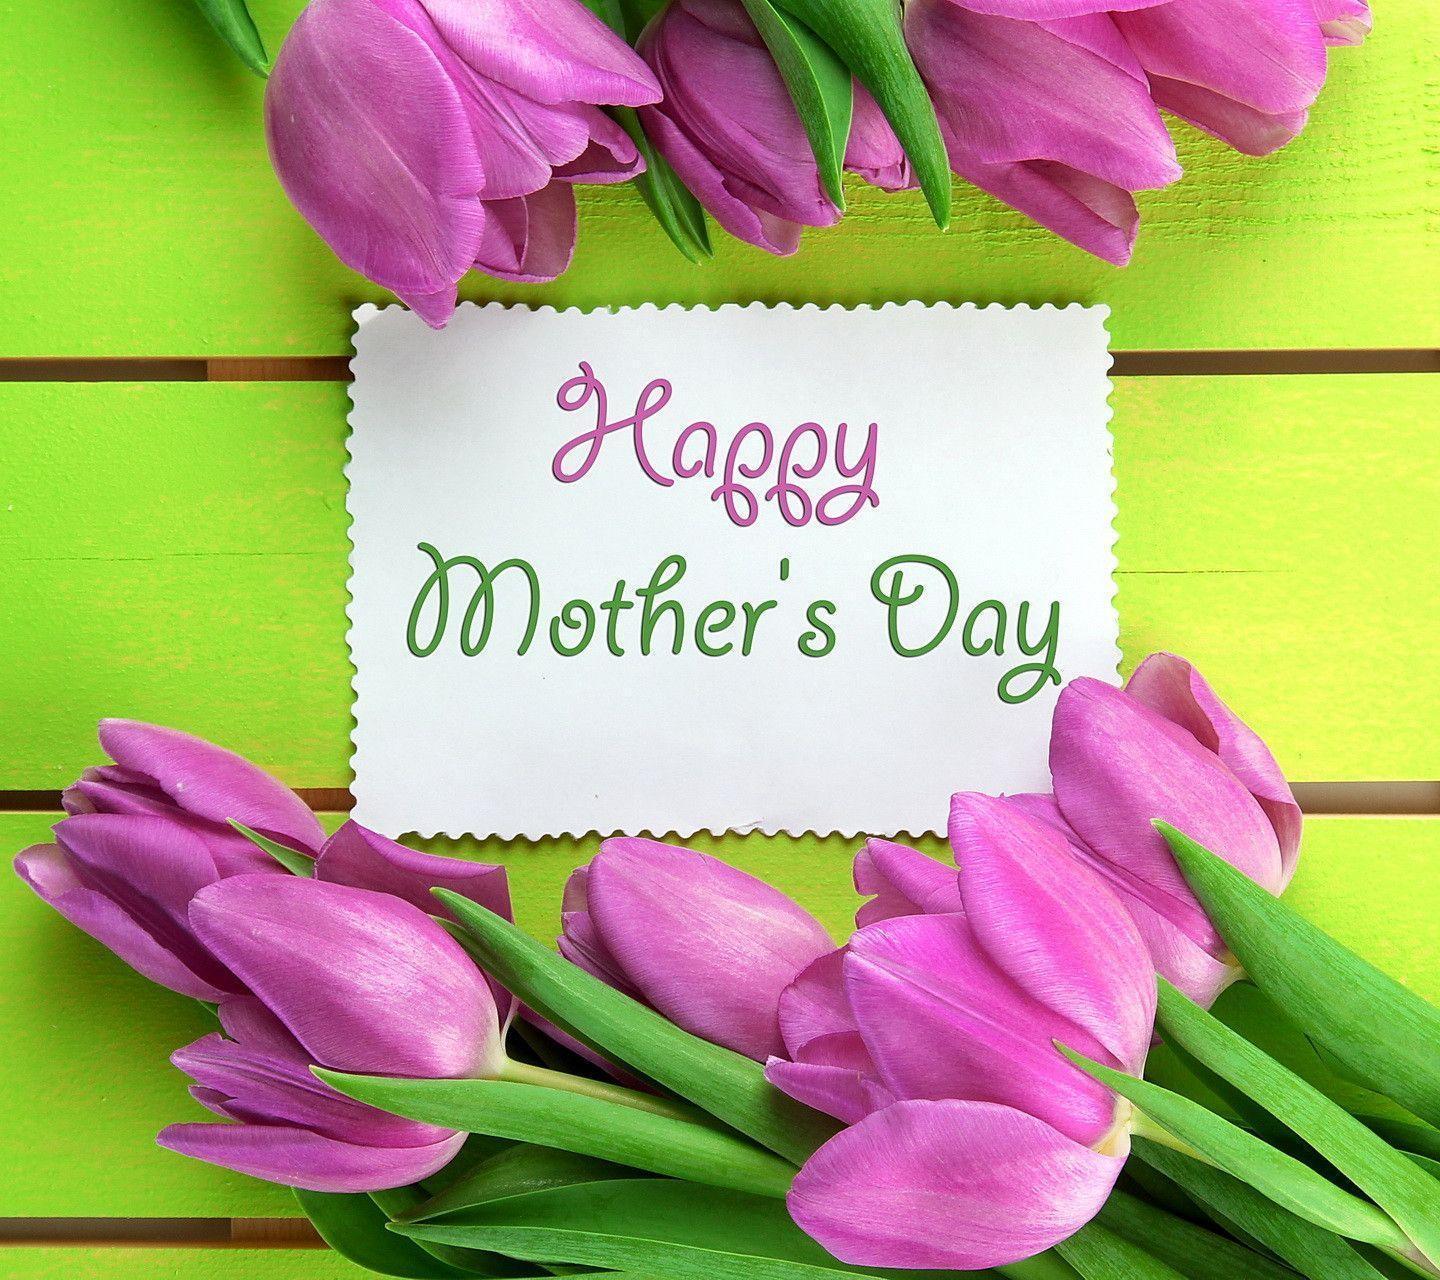 Happy Mother's Day Wallpapers - Wallpaper Cave